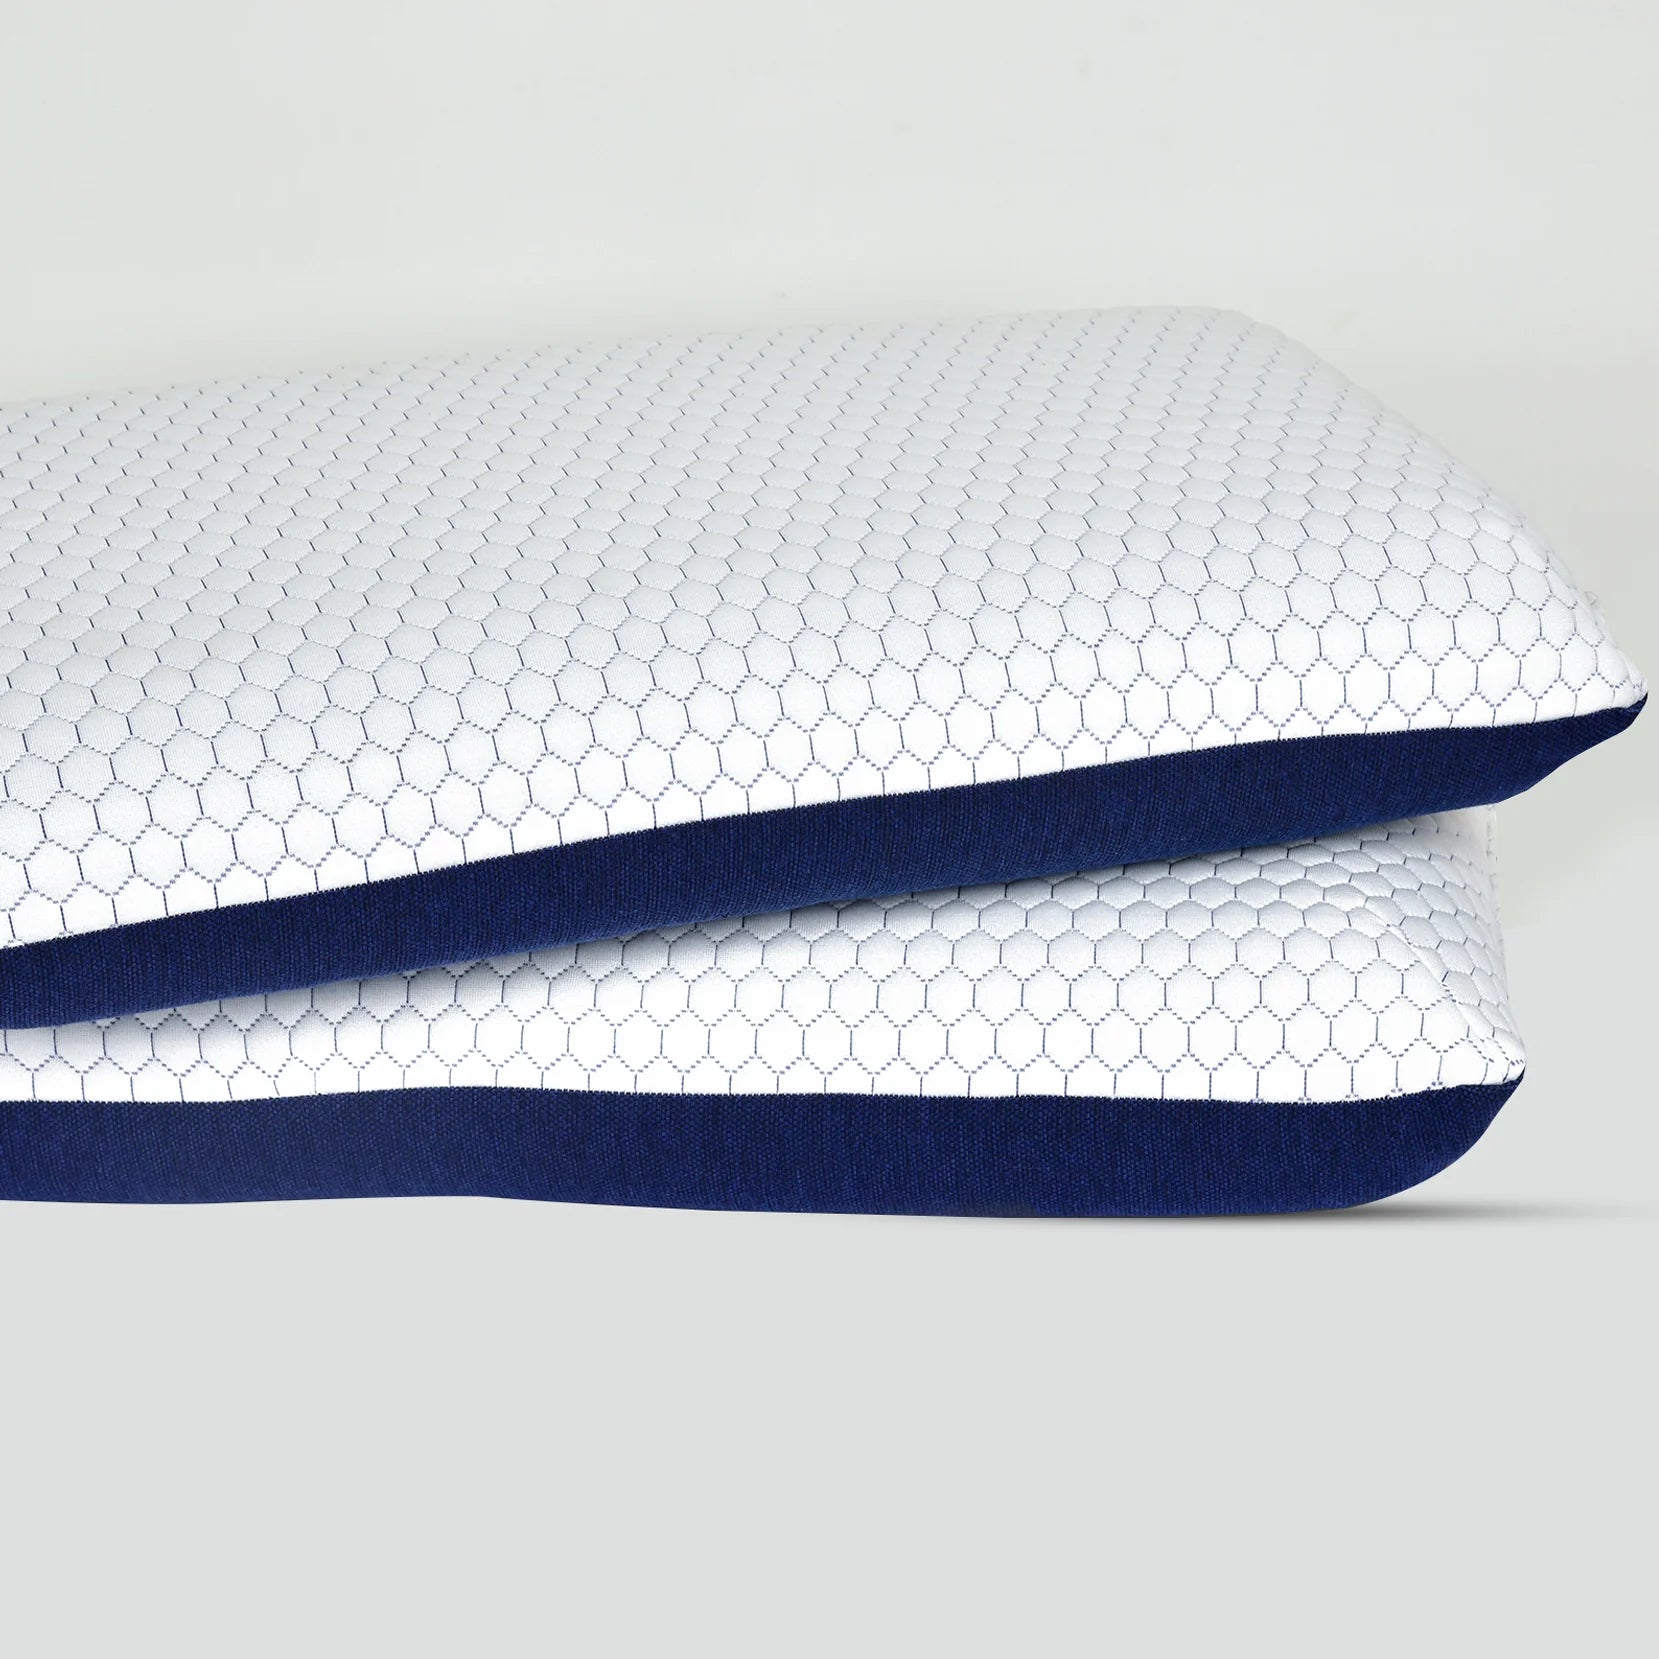 Choosing the best pillow for neck pain: A Guide